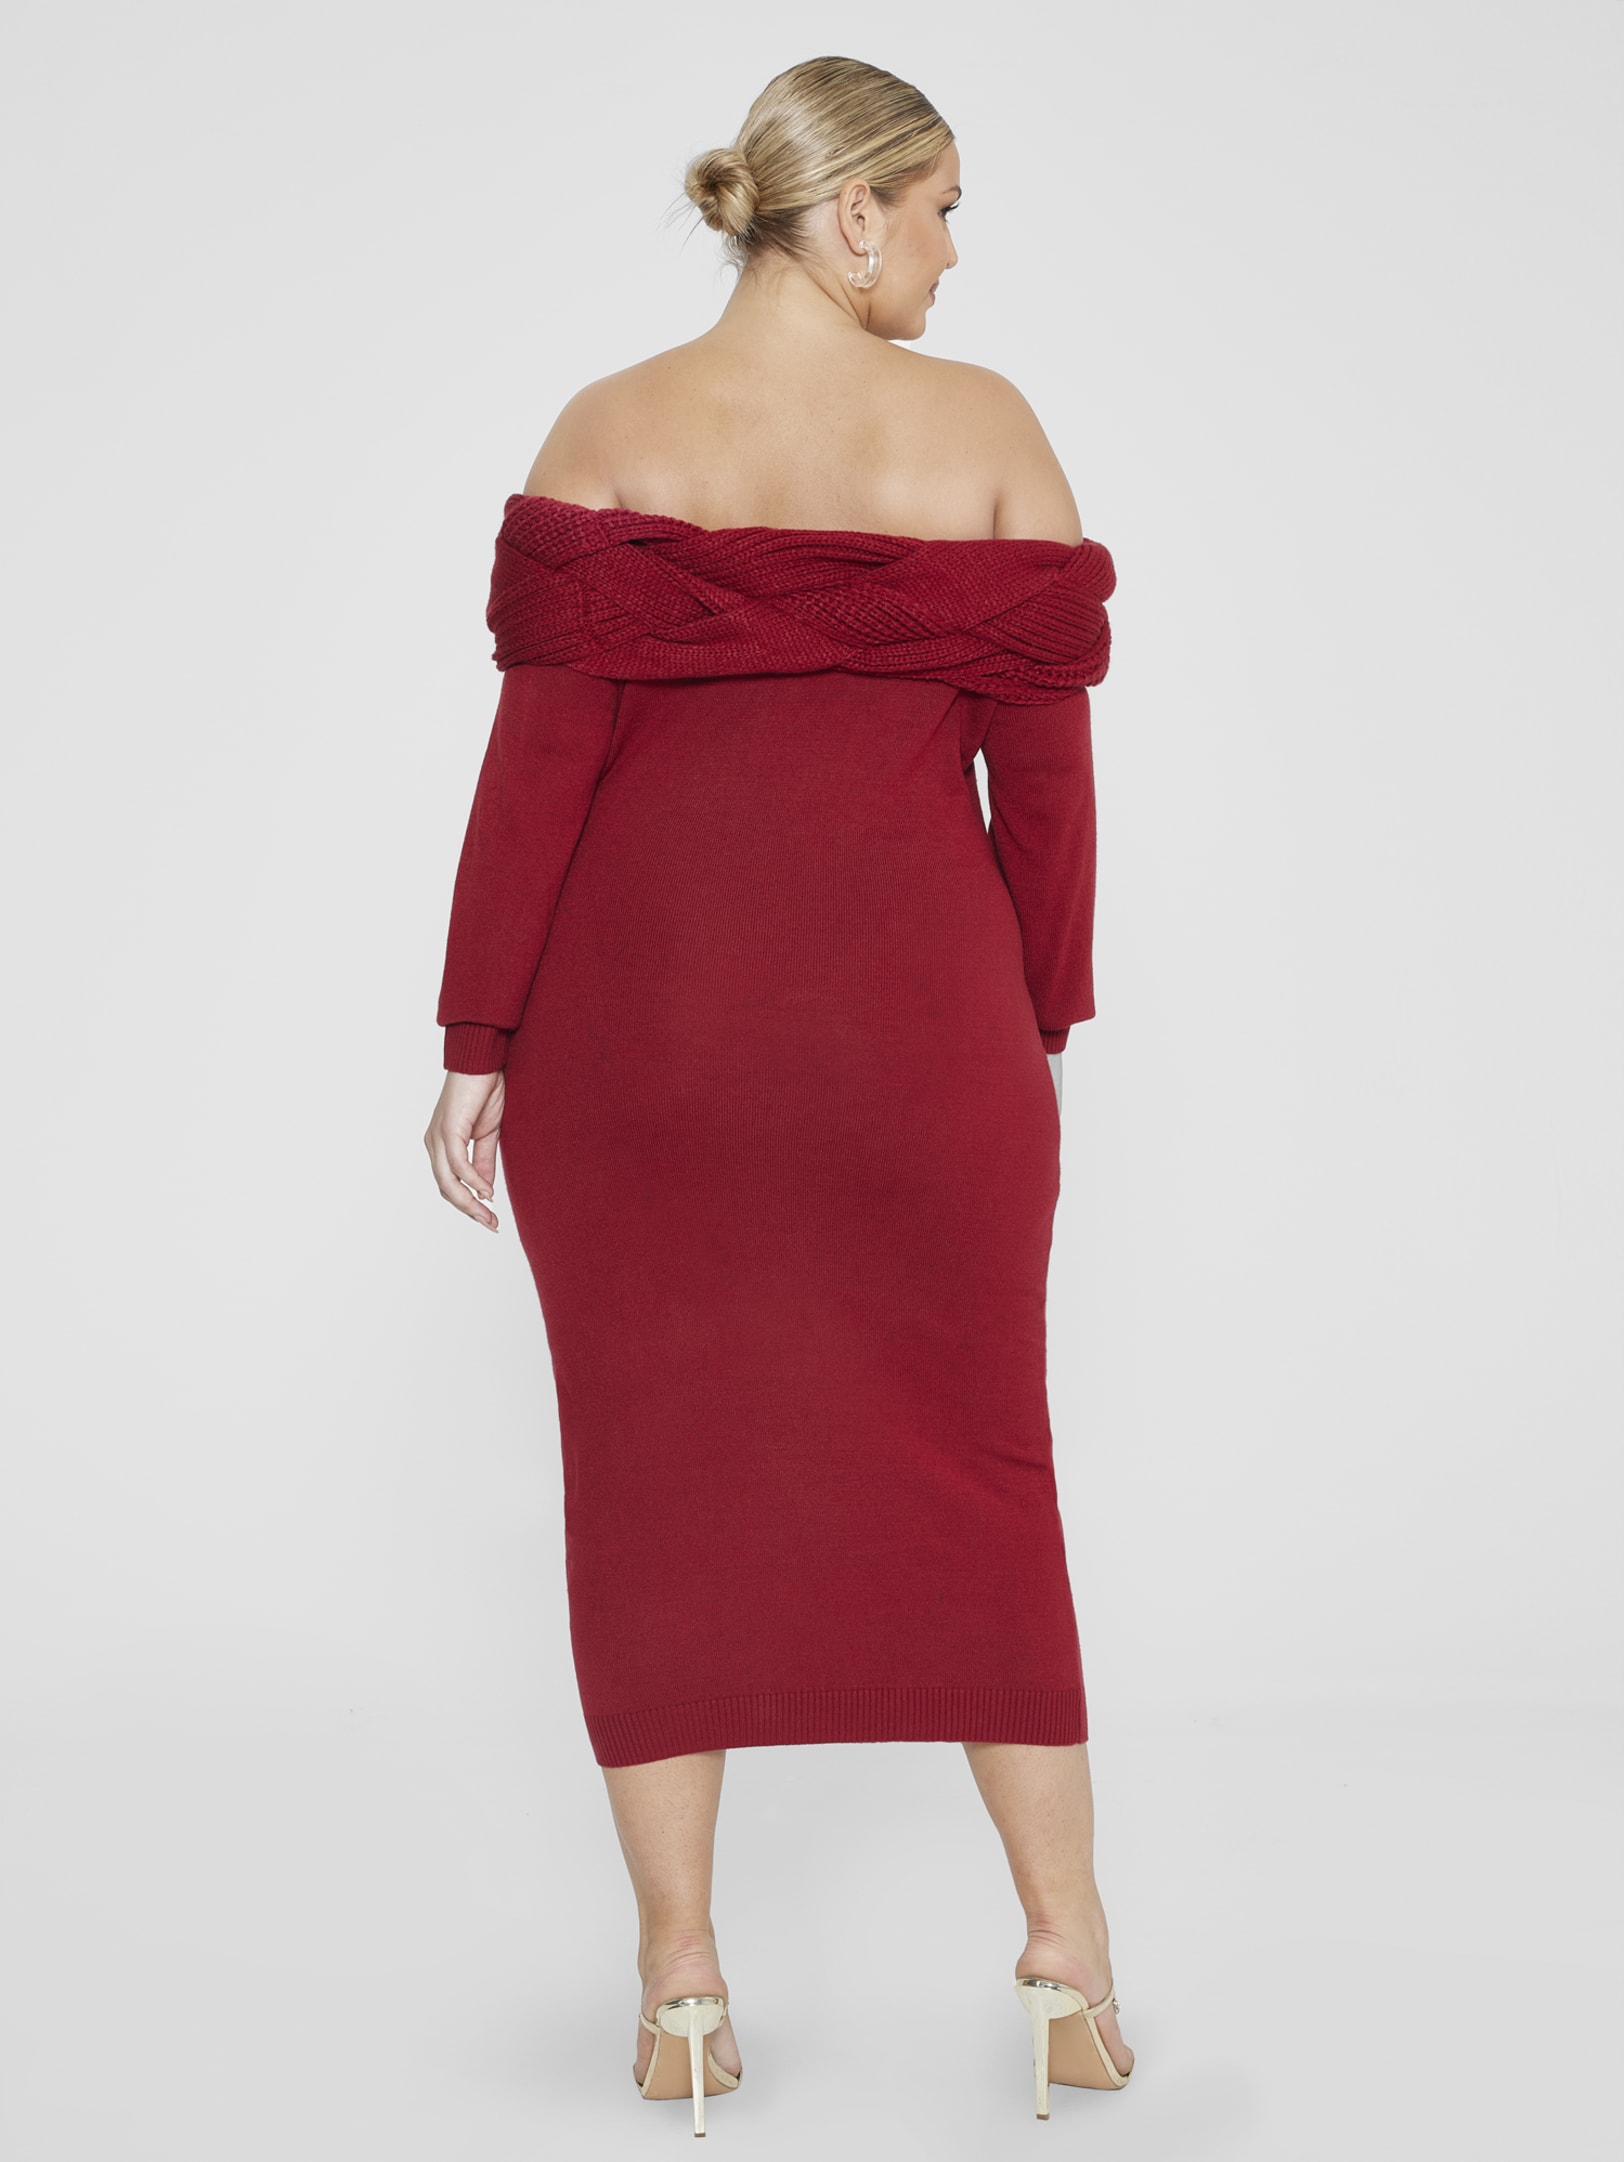 Wedding Guest Outfits for Curvy Ladies Plus Size Wedding Guest Dresses Off The Shoulder Red 4